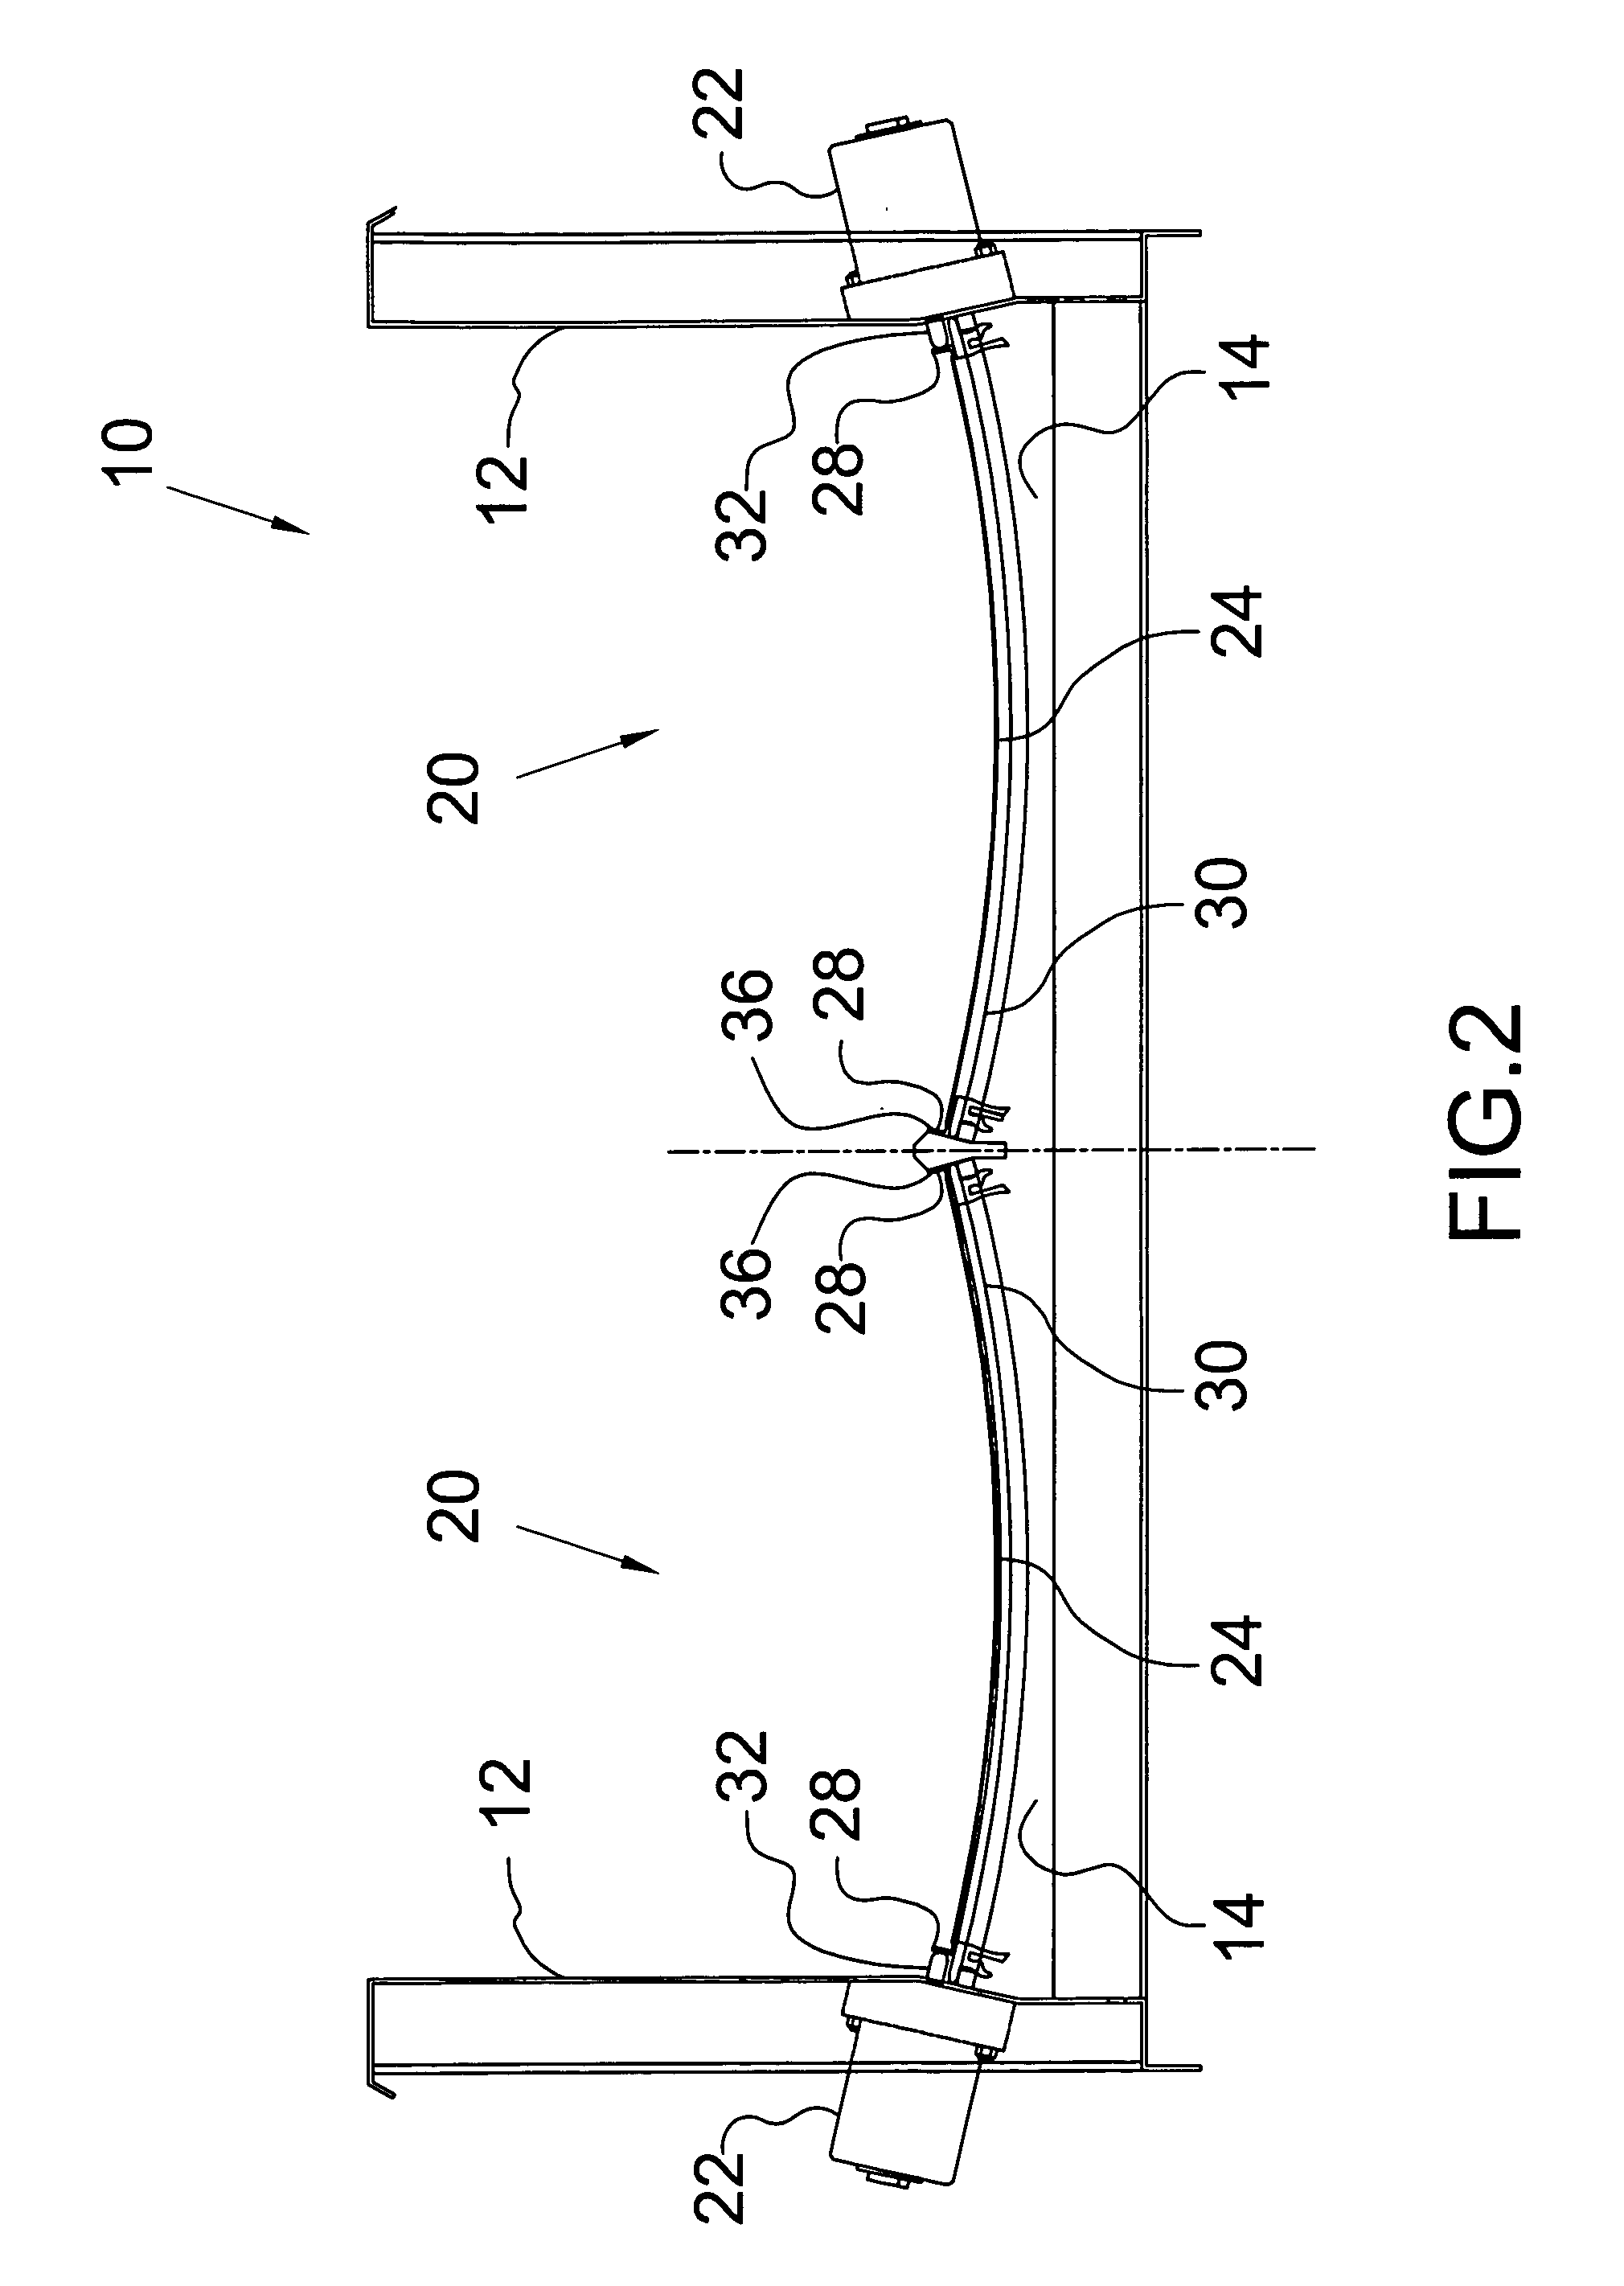 Method and apparatus for screening